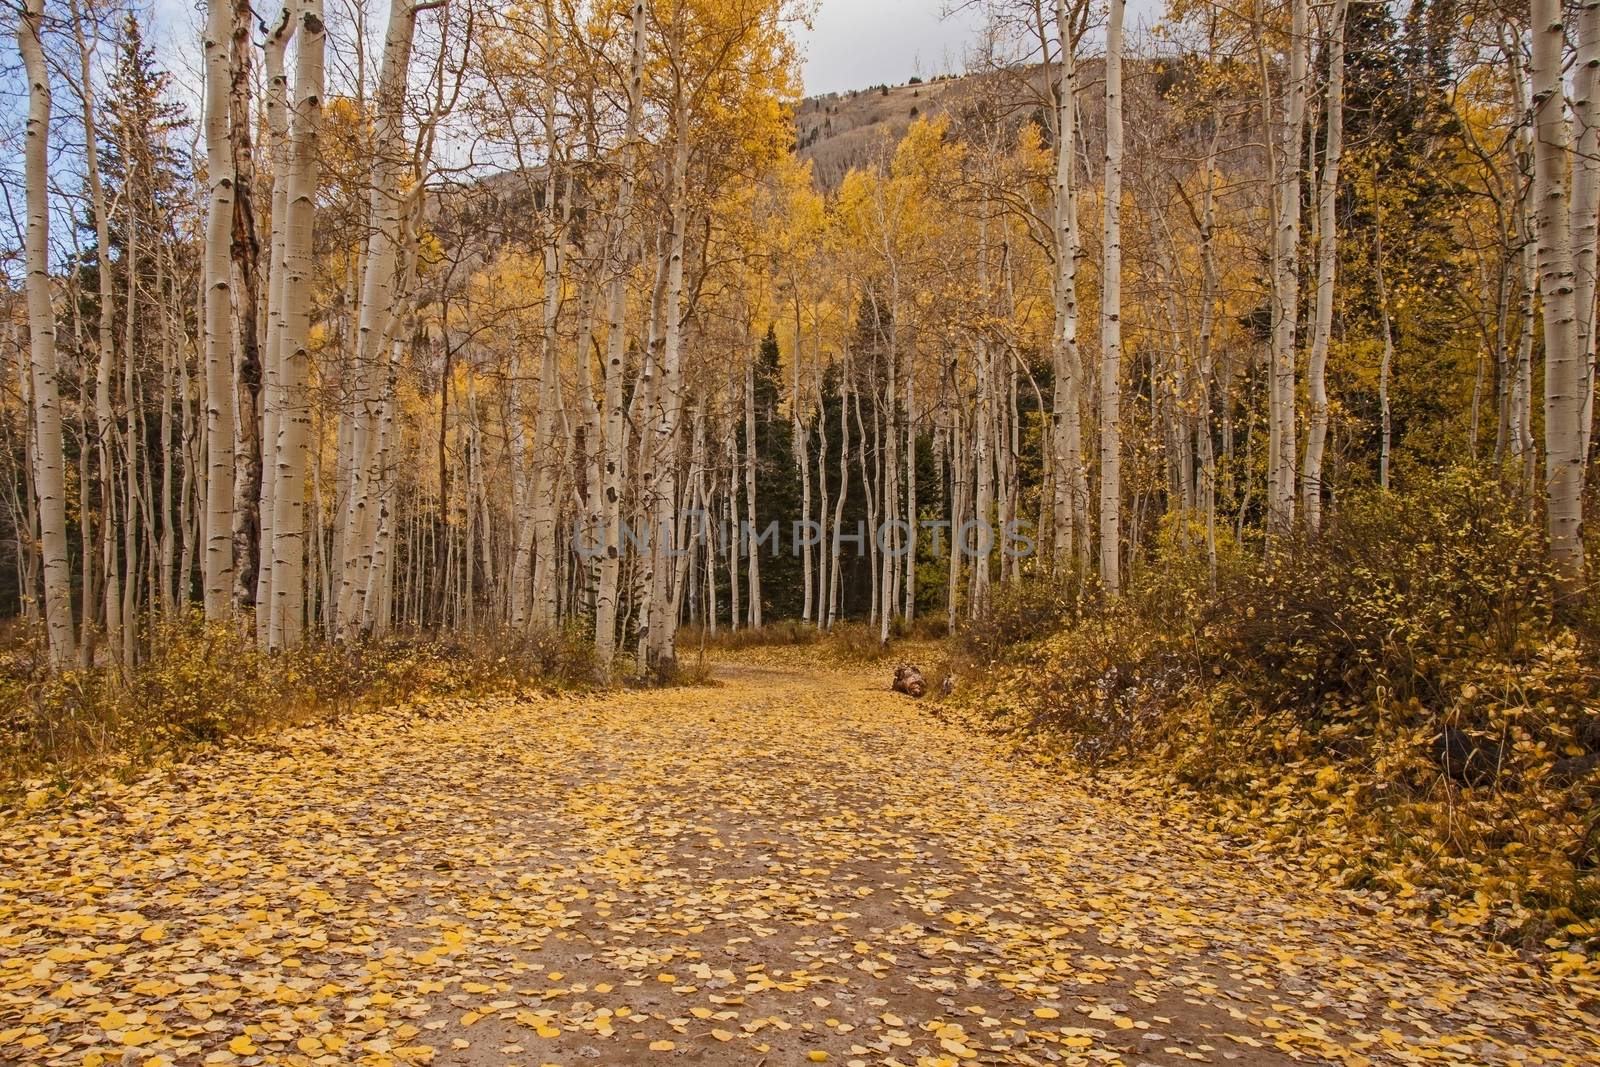 Quacking Aspen (Populus tremuloides) during fall by kobus_peche